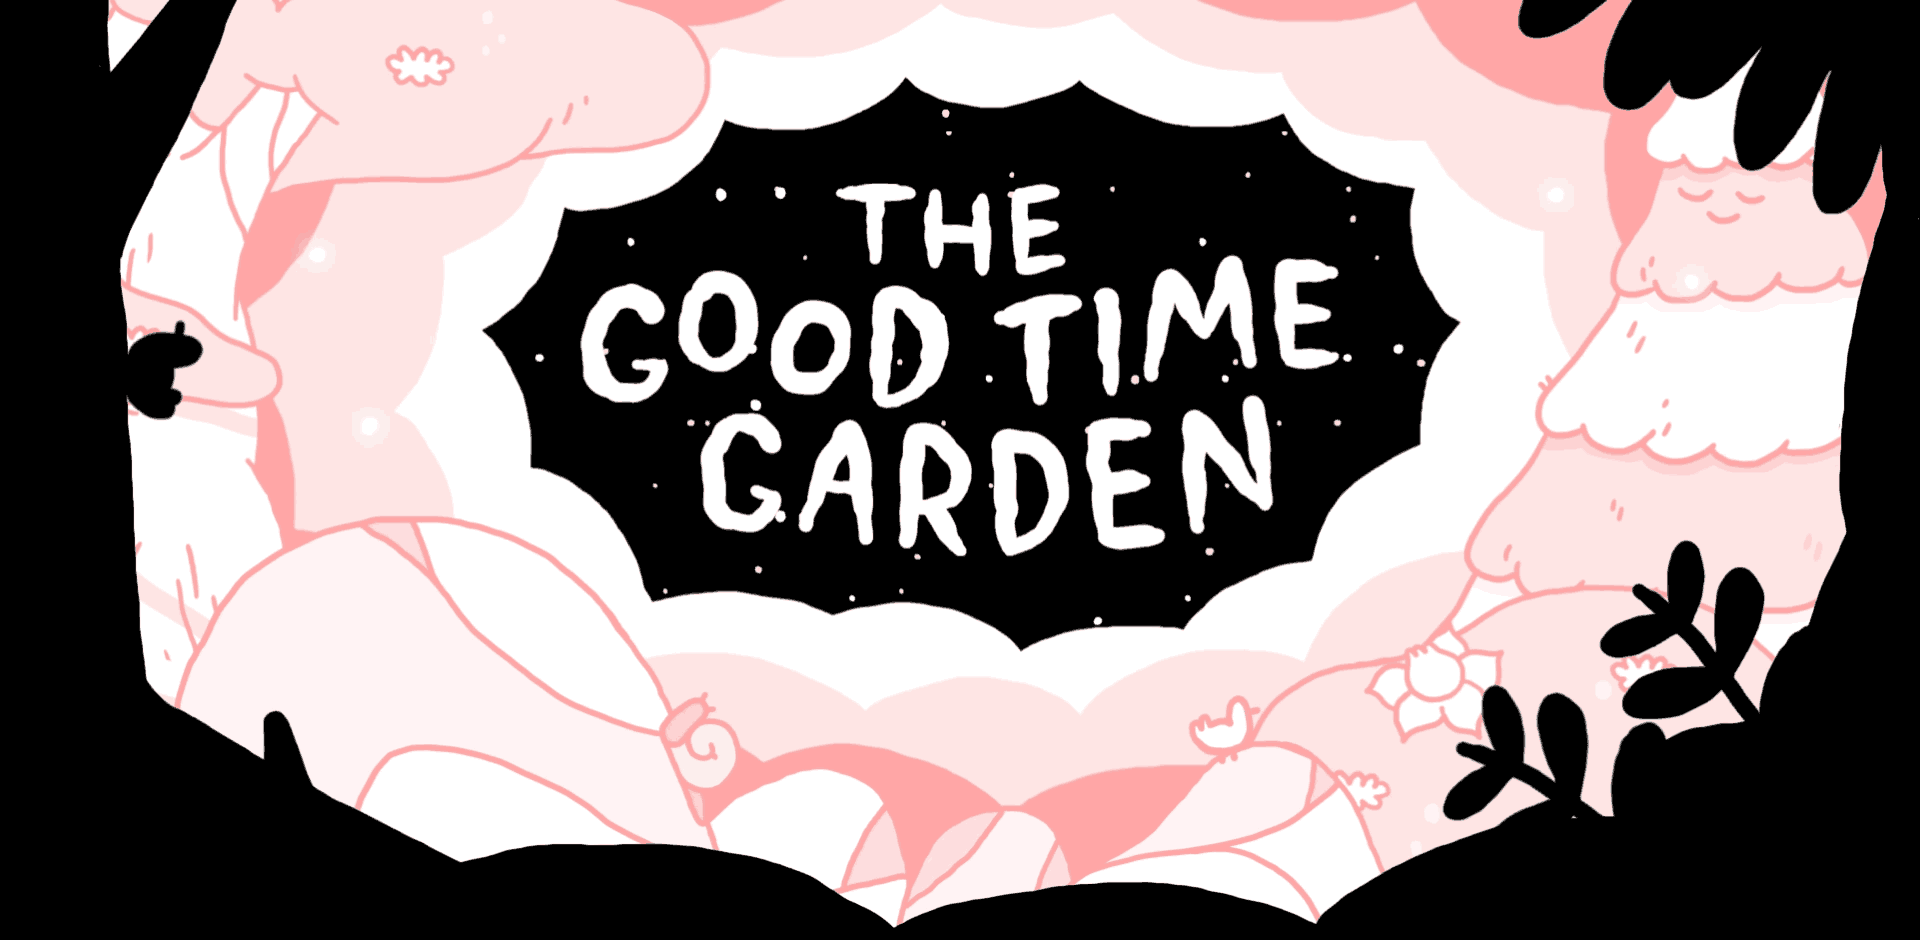 The Good Time Garden by Coal Supper